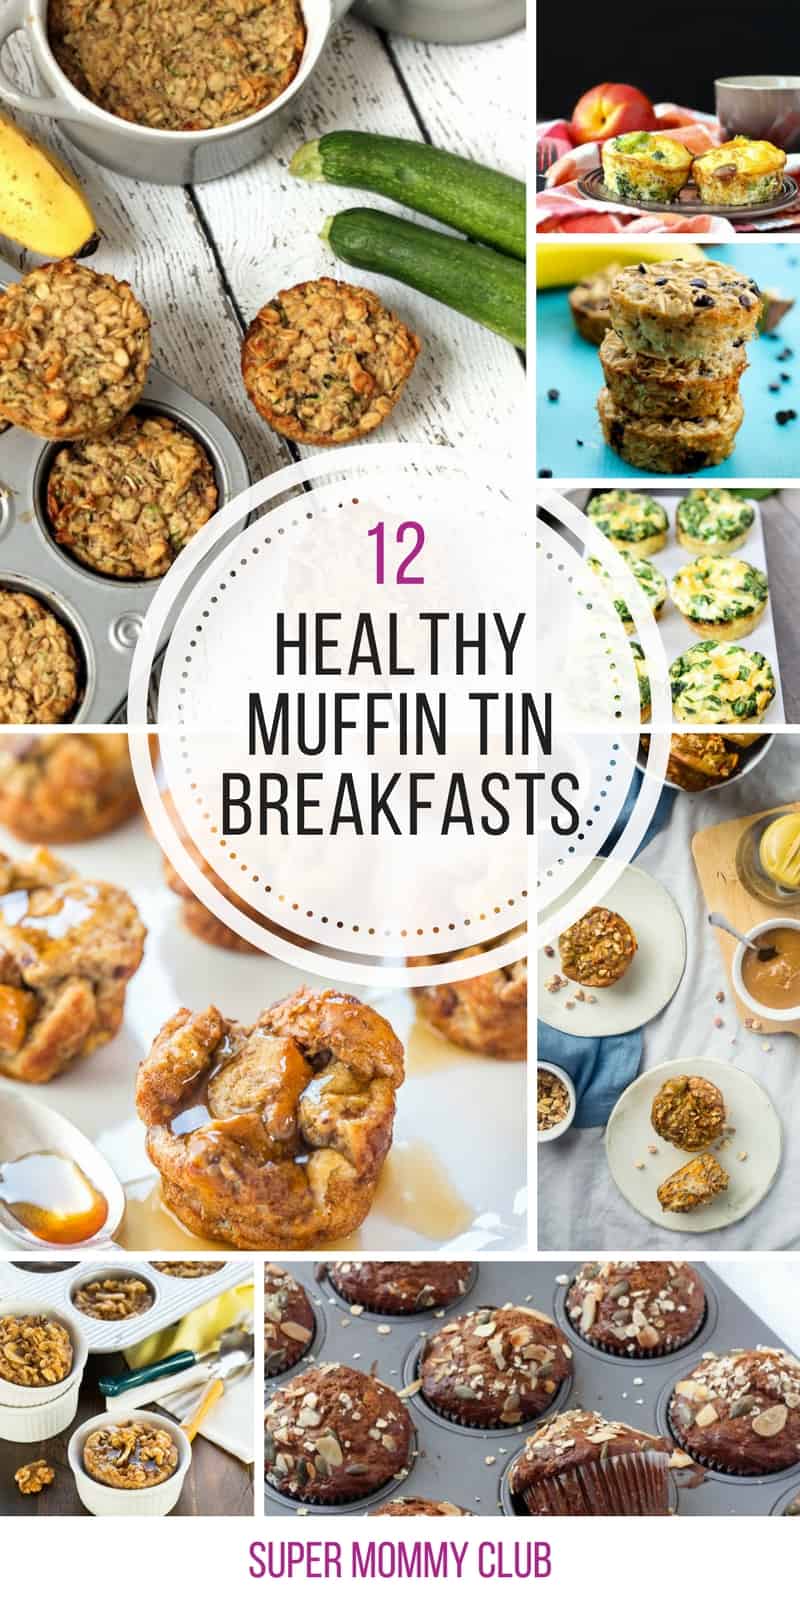 Hey fellow meal preppers! These muffin tin breakfasts are perfect for days we need to eat healthy on the run!